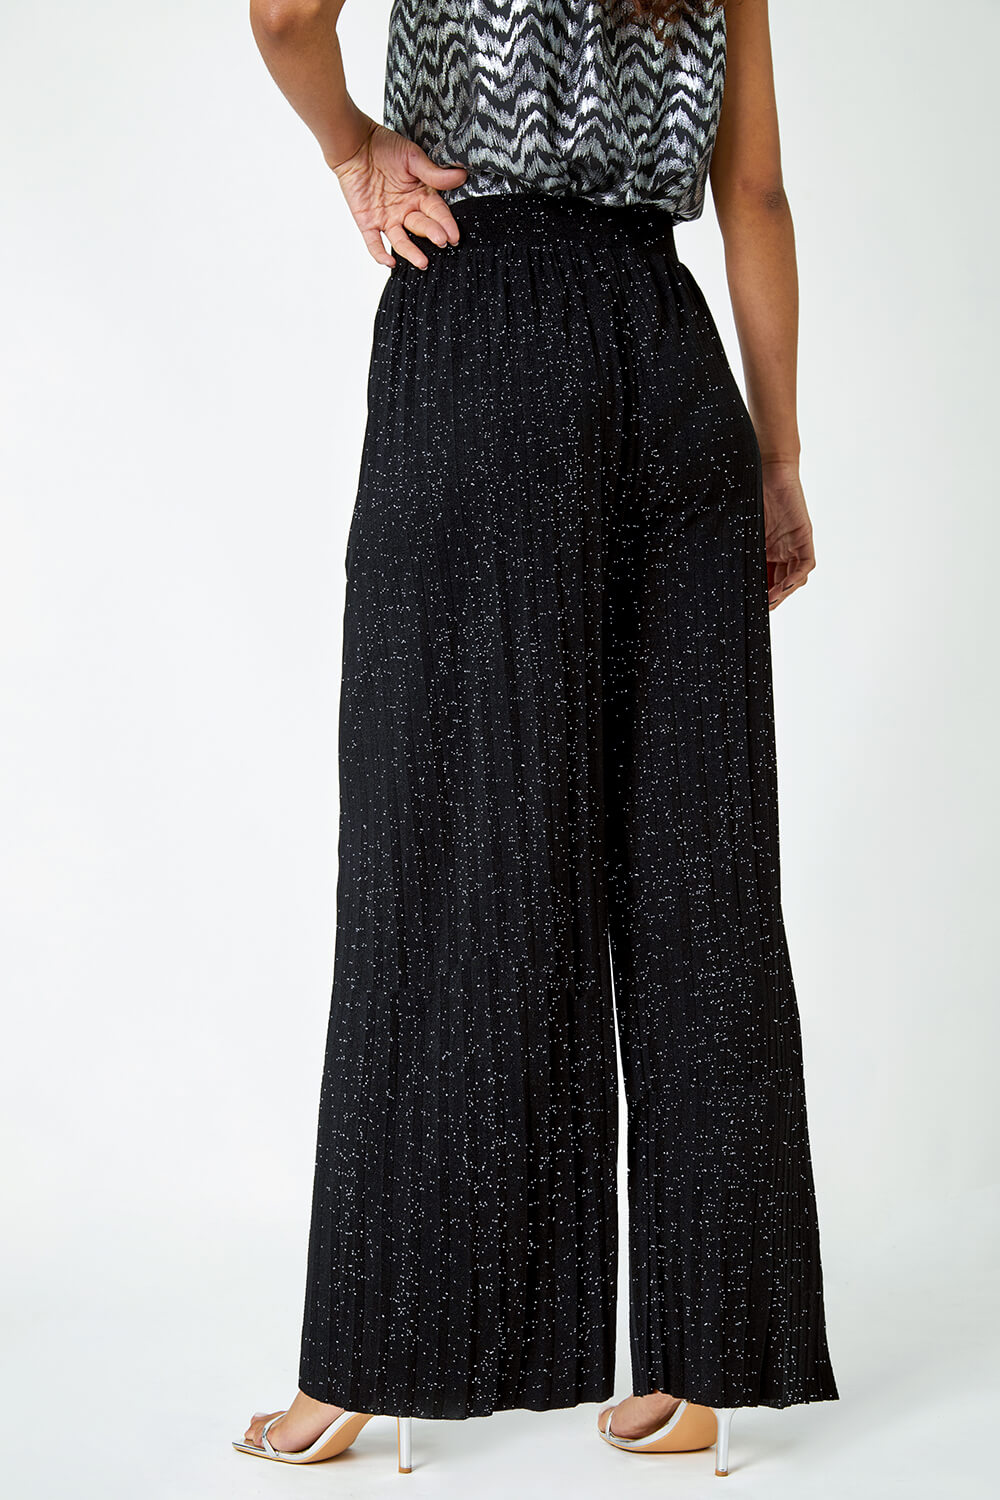 Black Pleated Glitter Stretch Trousers, Image 3 of 5